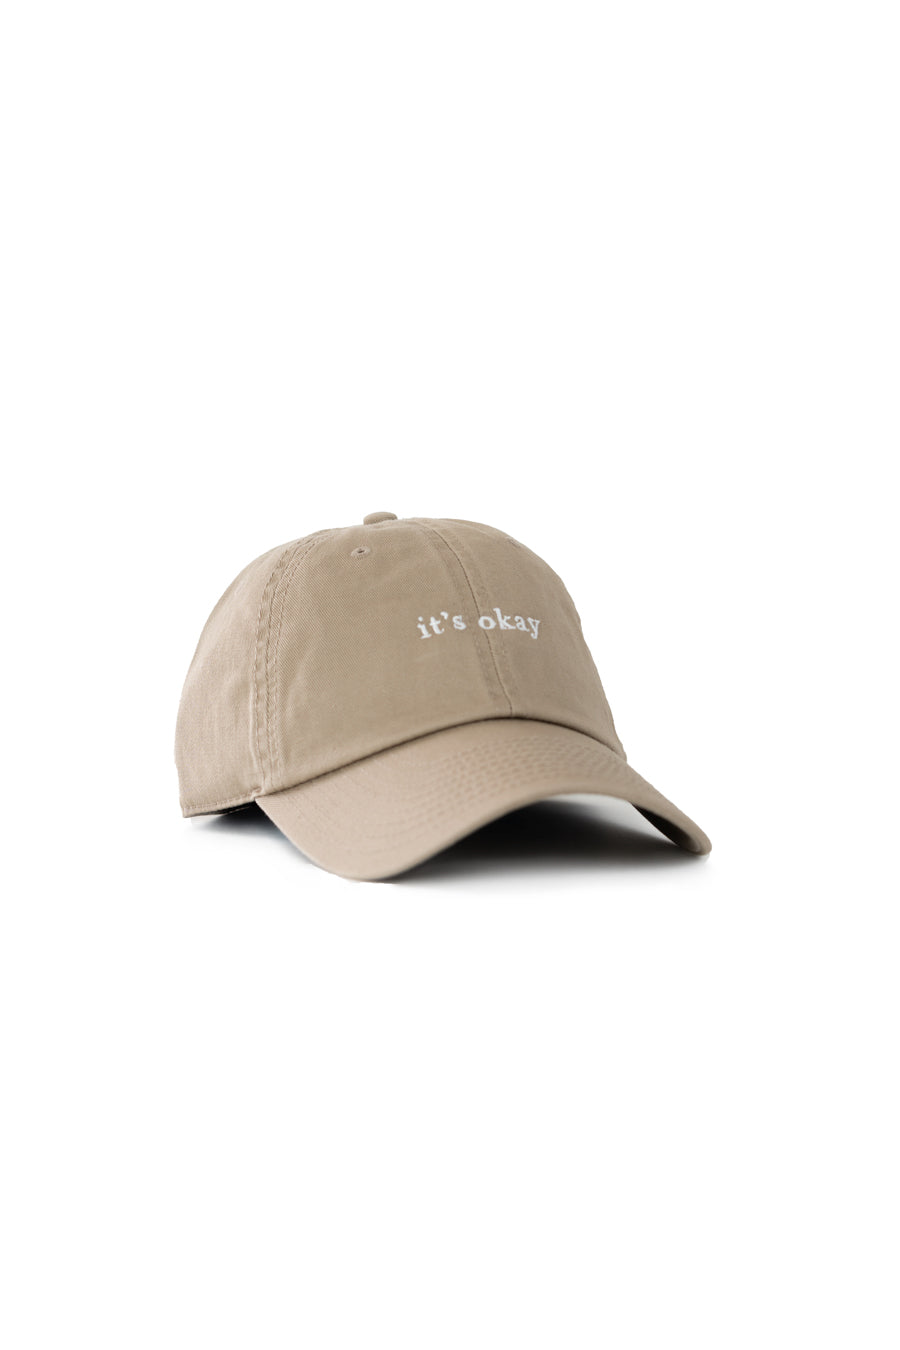 it's okay organic cap khaki | made with organic cotton, embroidered. This is a studio photography of the cap.